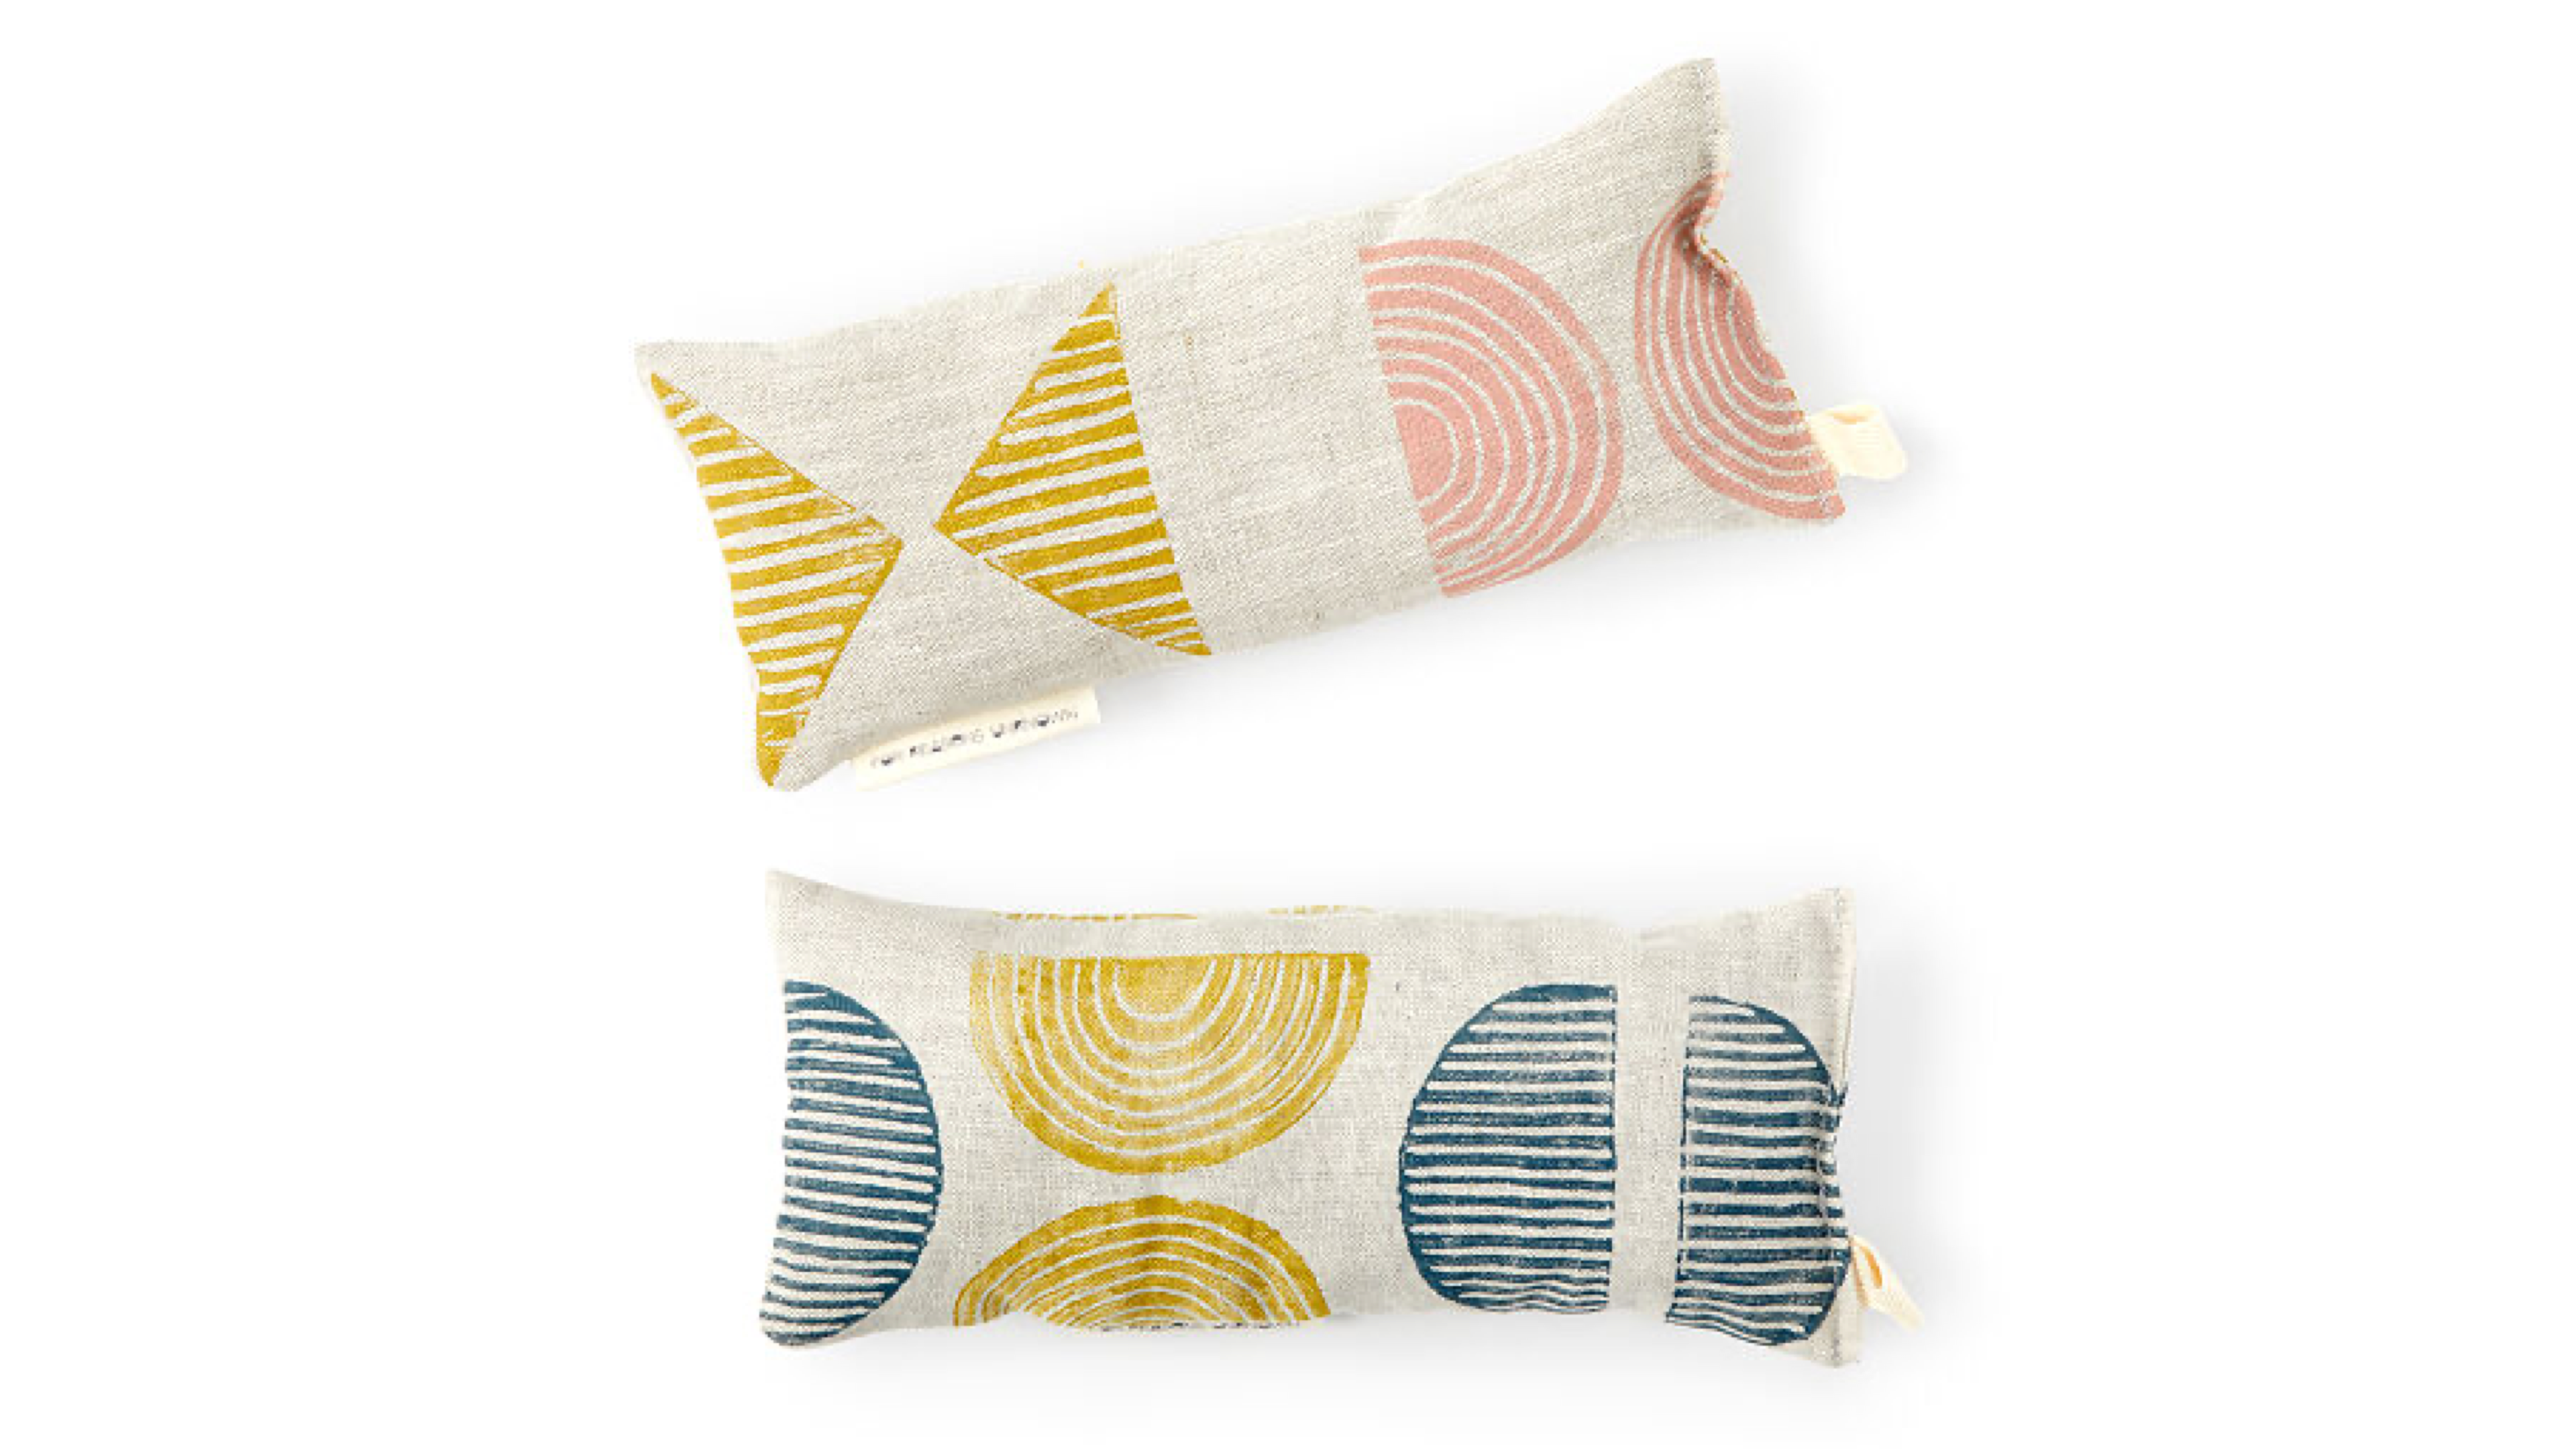 lavender scented eye pillows great for nap time